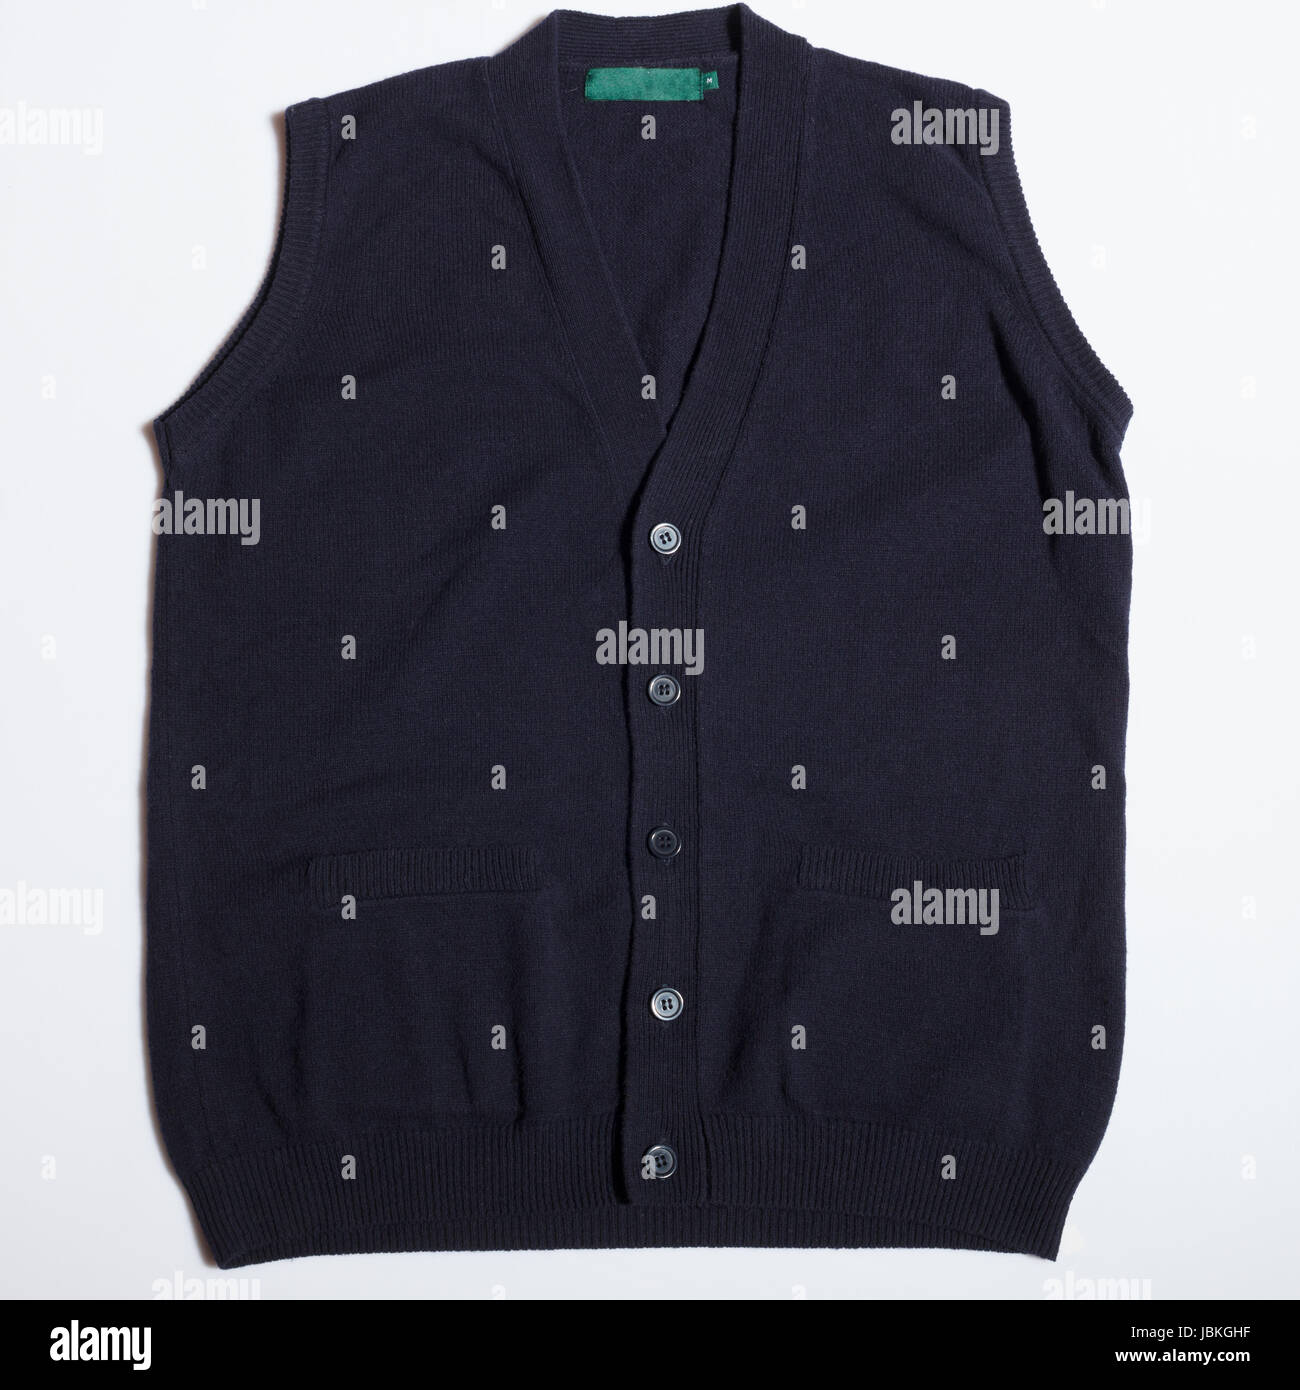 Mens Vest High Resolution Stock Photography and Images - Alamy